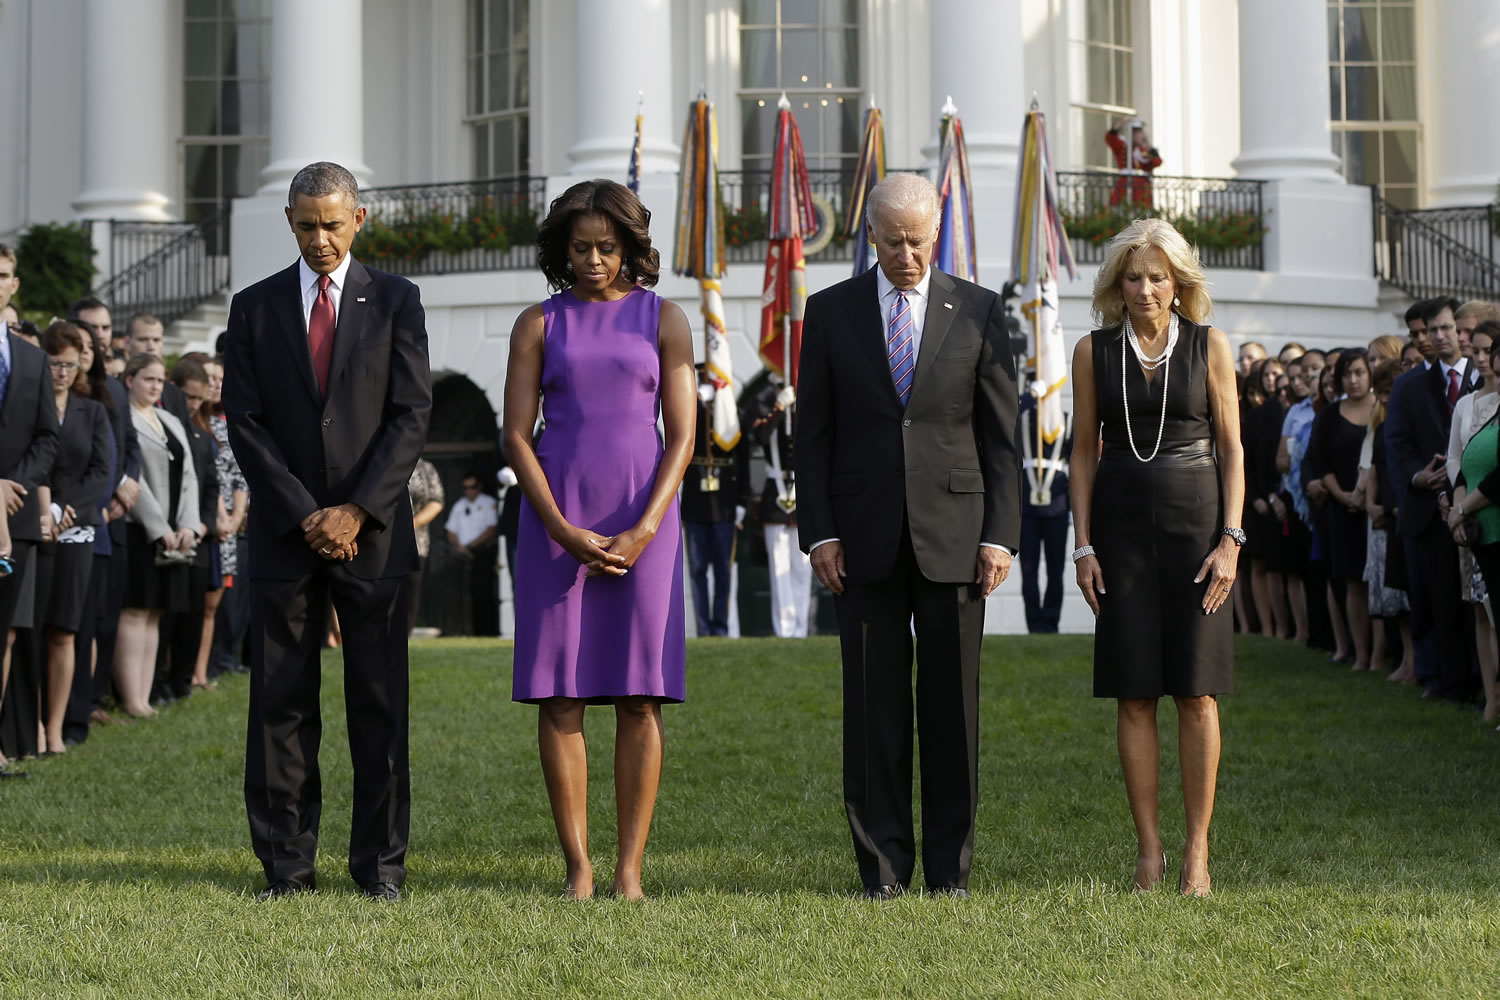 President Barack Obama, first lady Michelle Obama, Vice President Joe Biden and Jill Biden bow their heads for a moment of silence on the South Lawn of the White House in Washington on Wednesday to mark the 12th anniversary of the September 11 terror attacks.